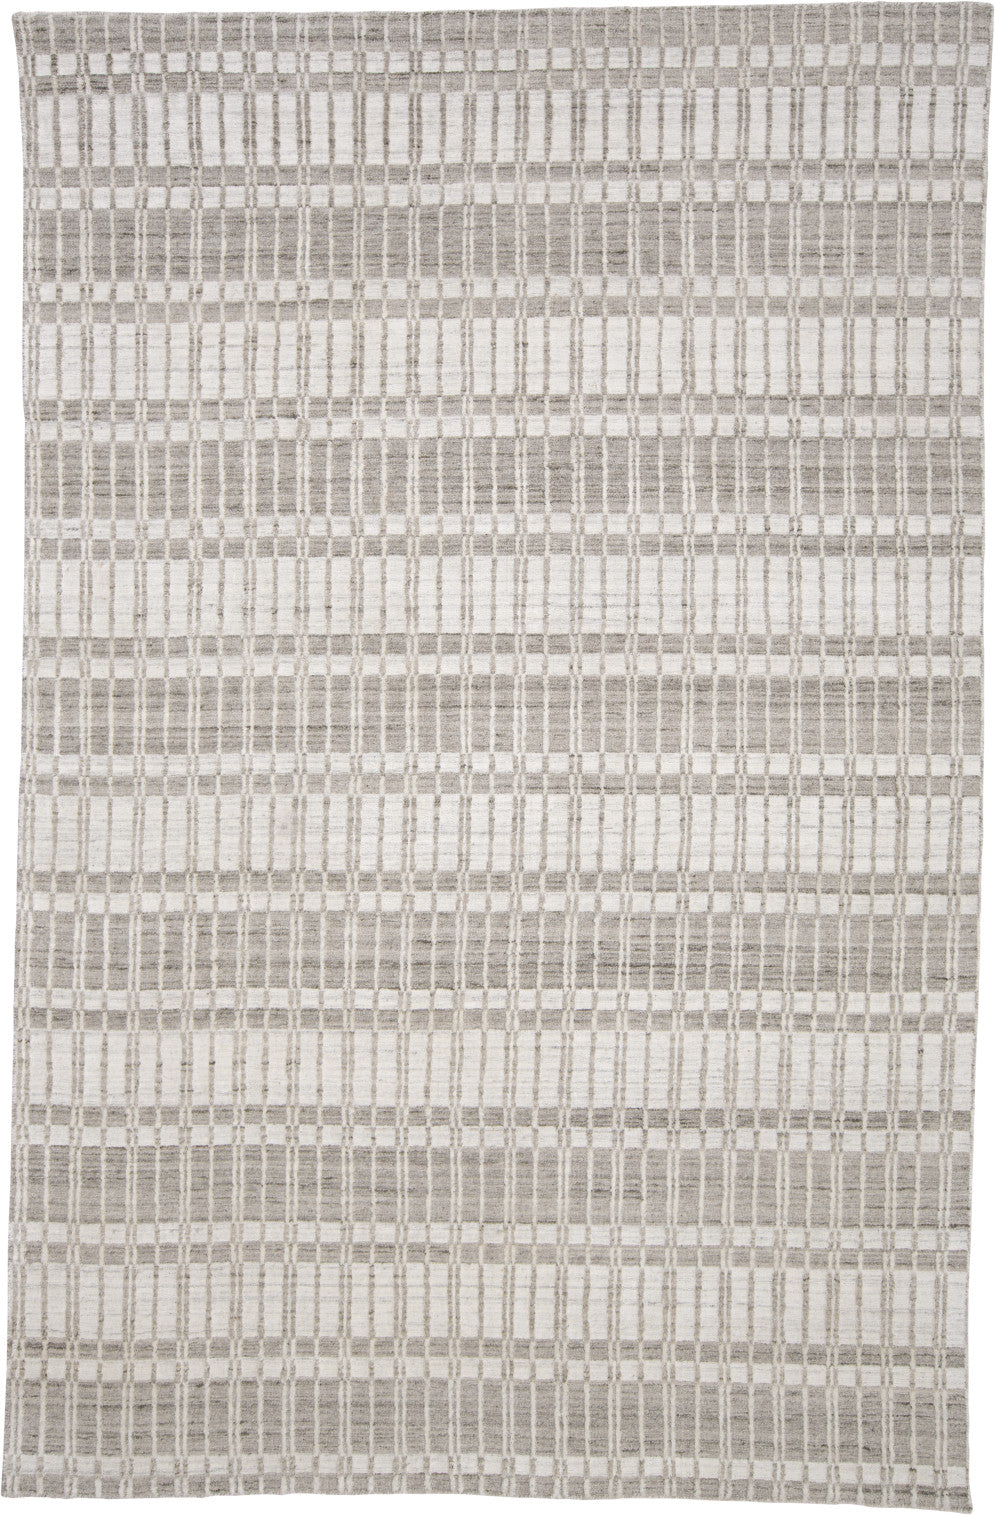 5' X 8' Ivory Taupe And Tan Striped Hand Woven Area Rug